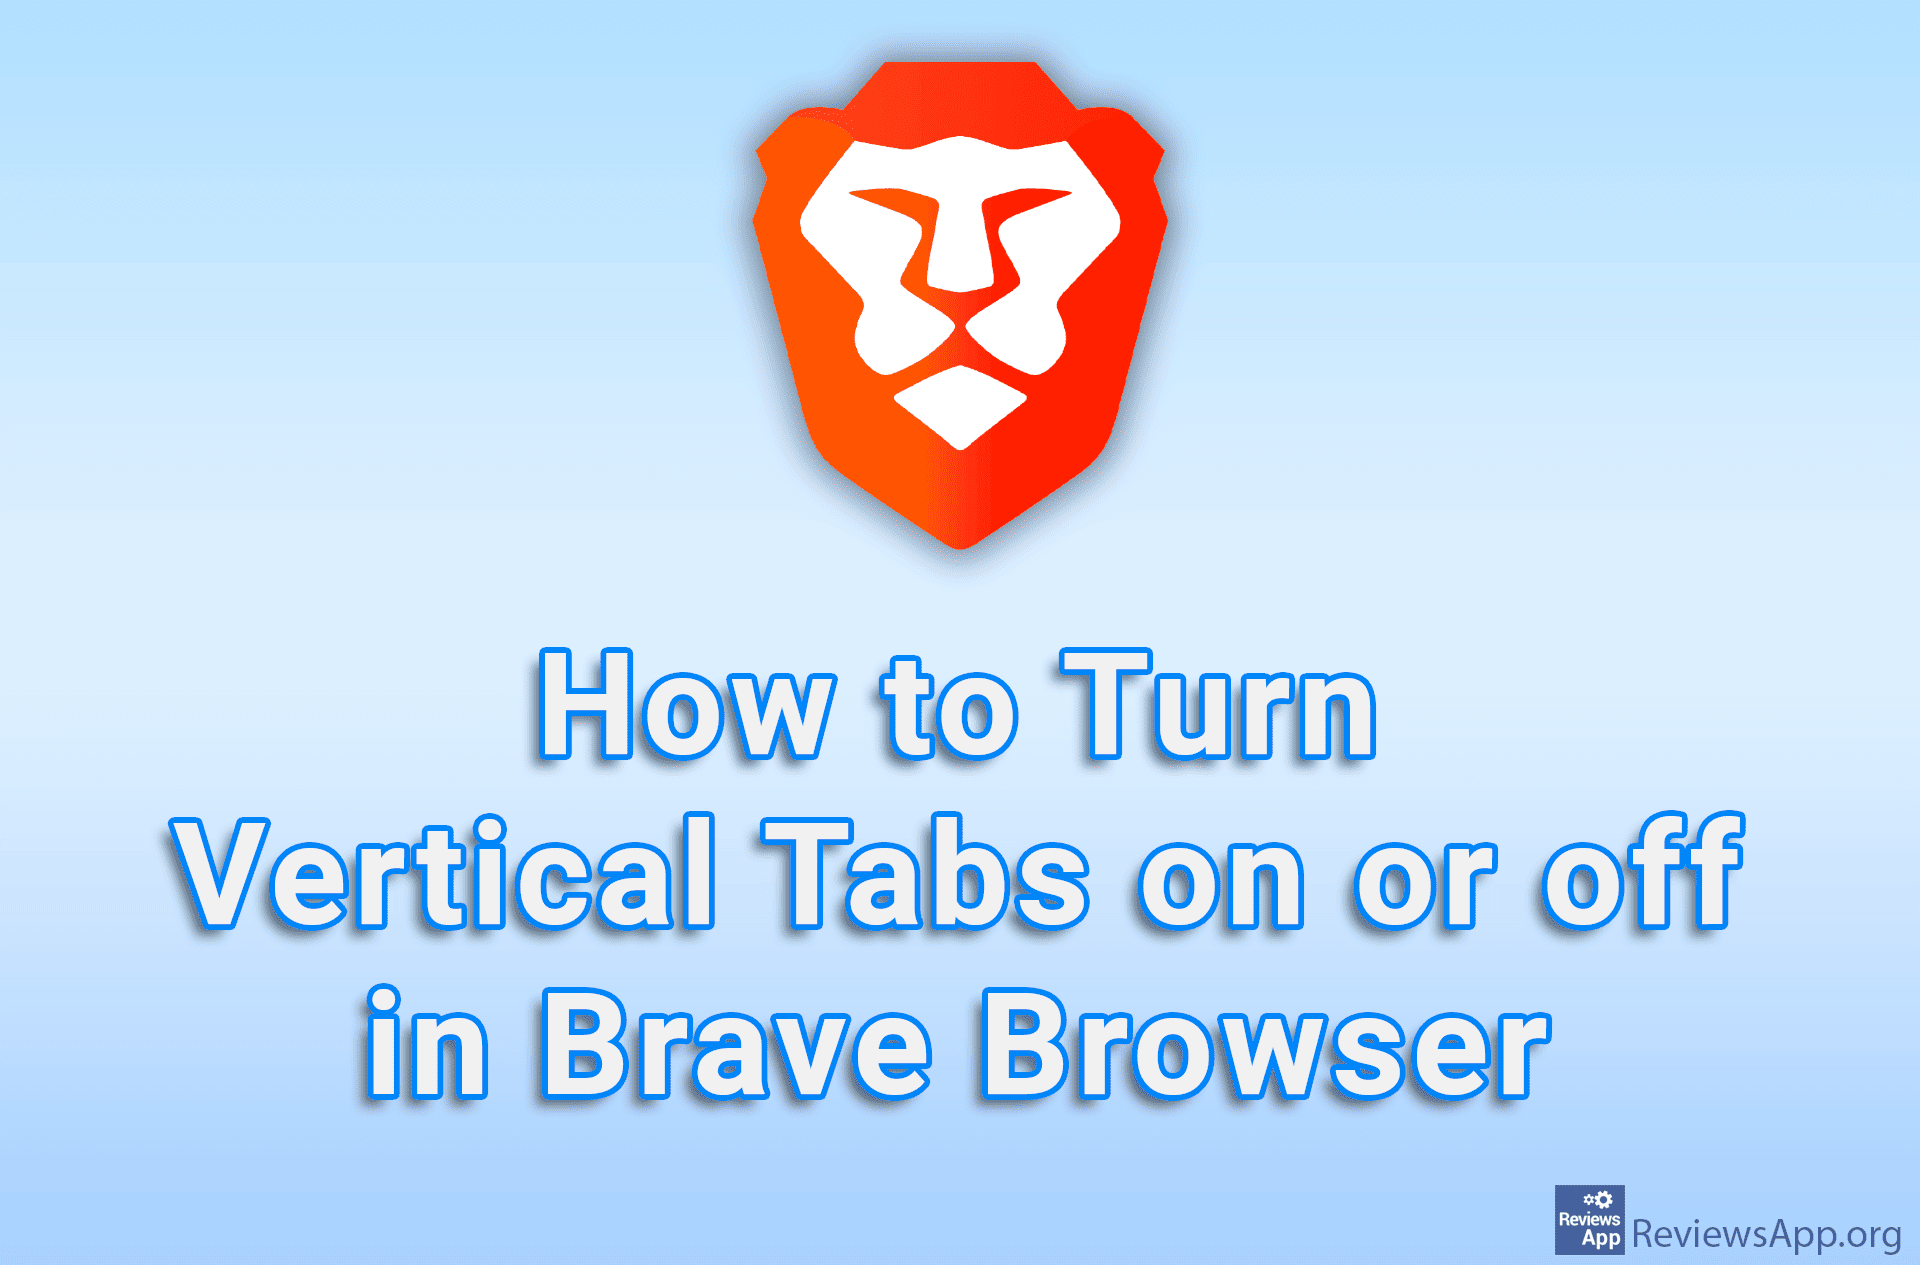 How to Turn Vertical Tabs on or off in Brave Browser